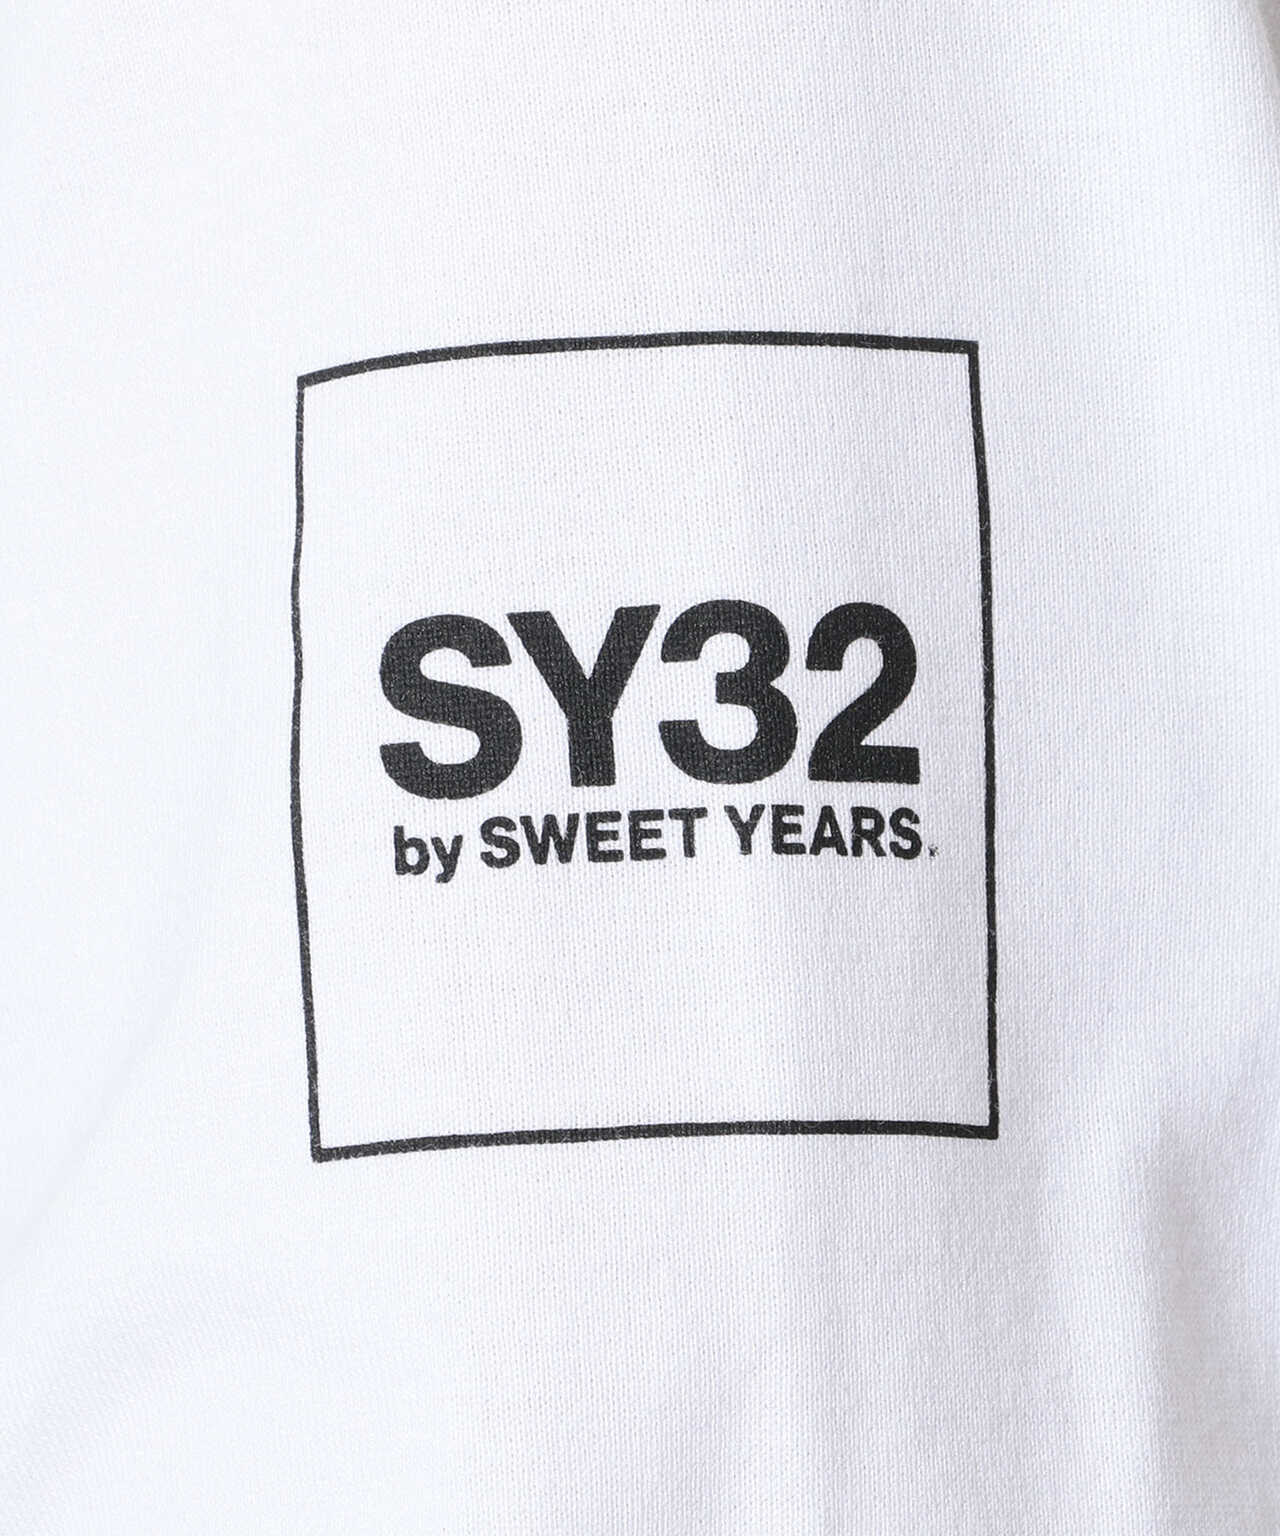 SY32 by SWEET YEARS /エスワイサーティトゥバイ スィートイヤーズ